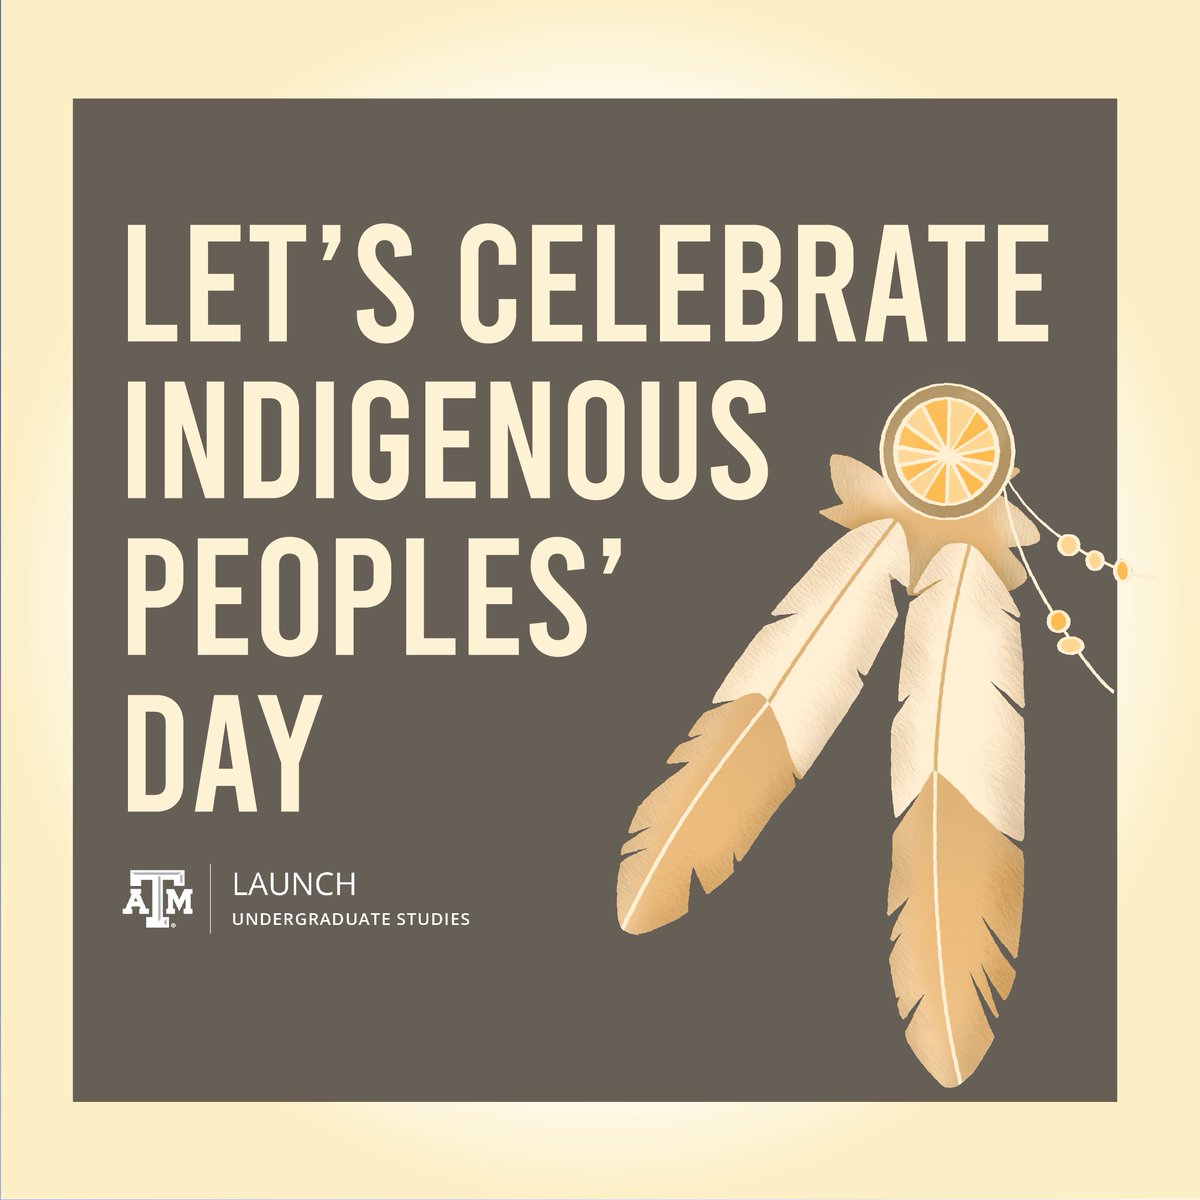 From all of us at LAUNCH, let's celebrate #IndigenousPeoplesDay together with honoring Native American history and culture across the country